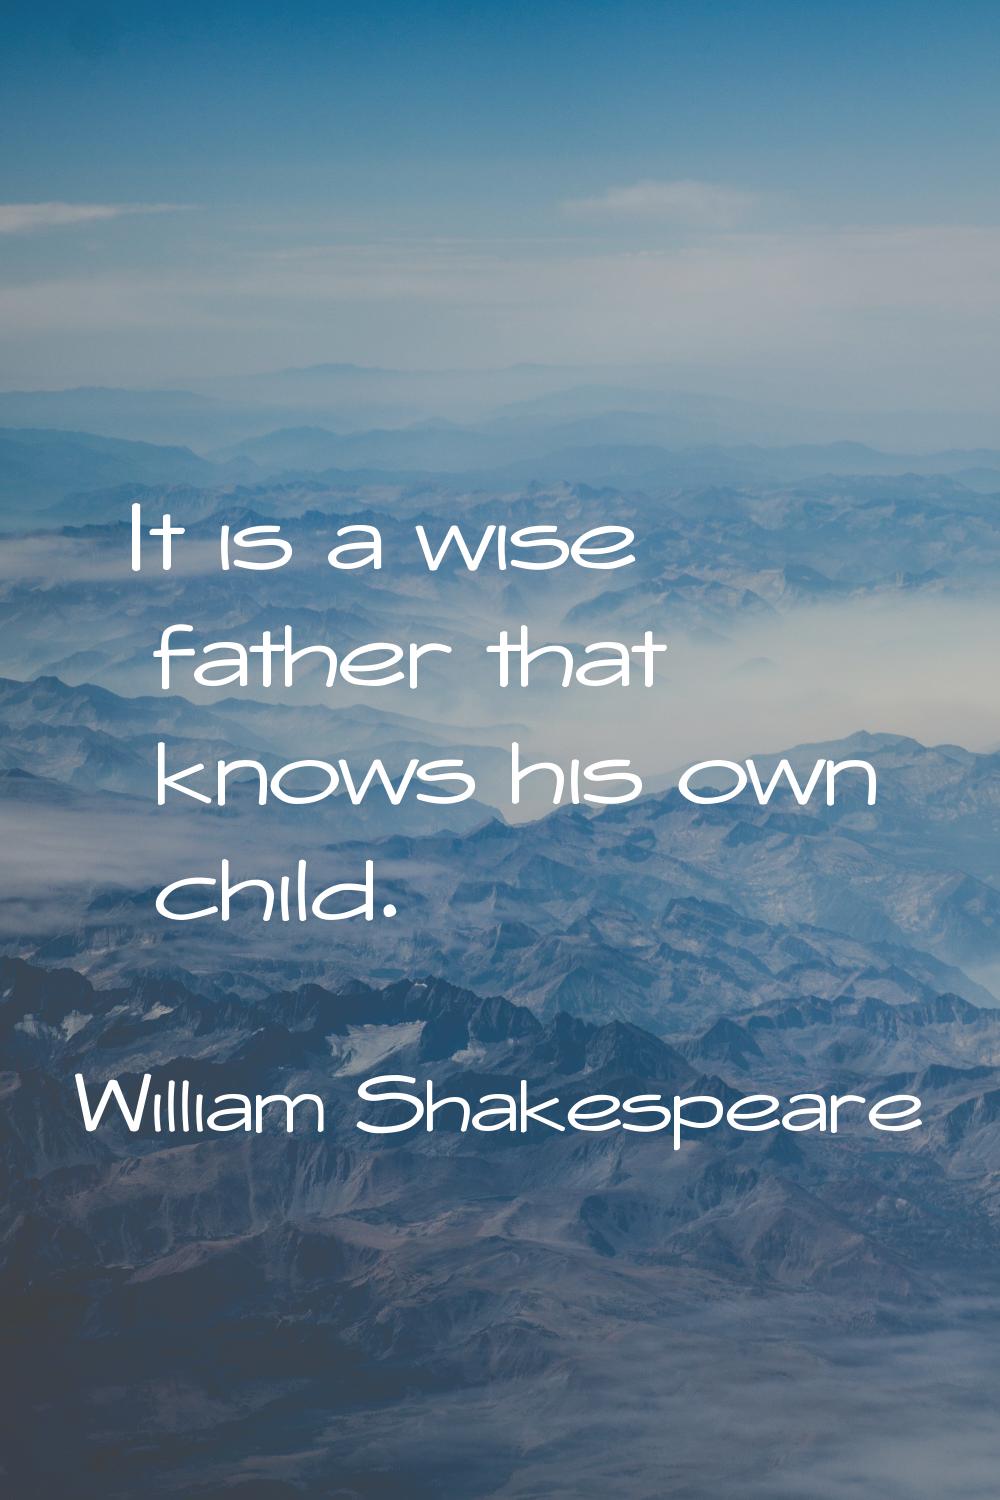 It is a wise father that knows his own child.